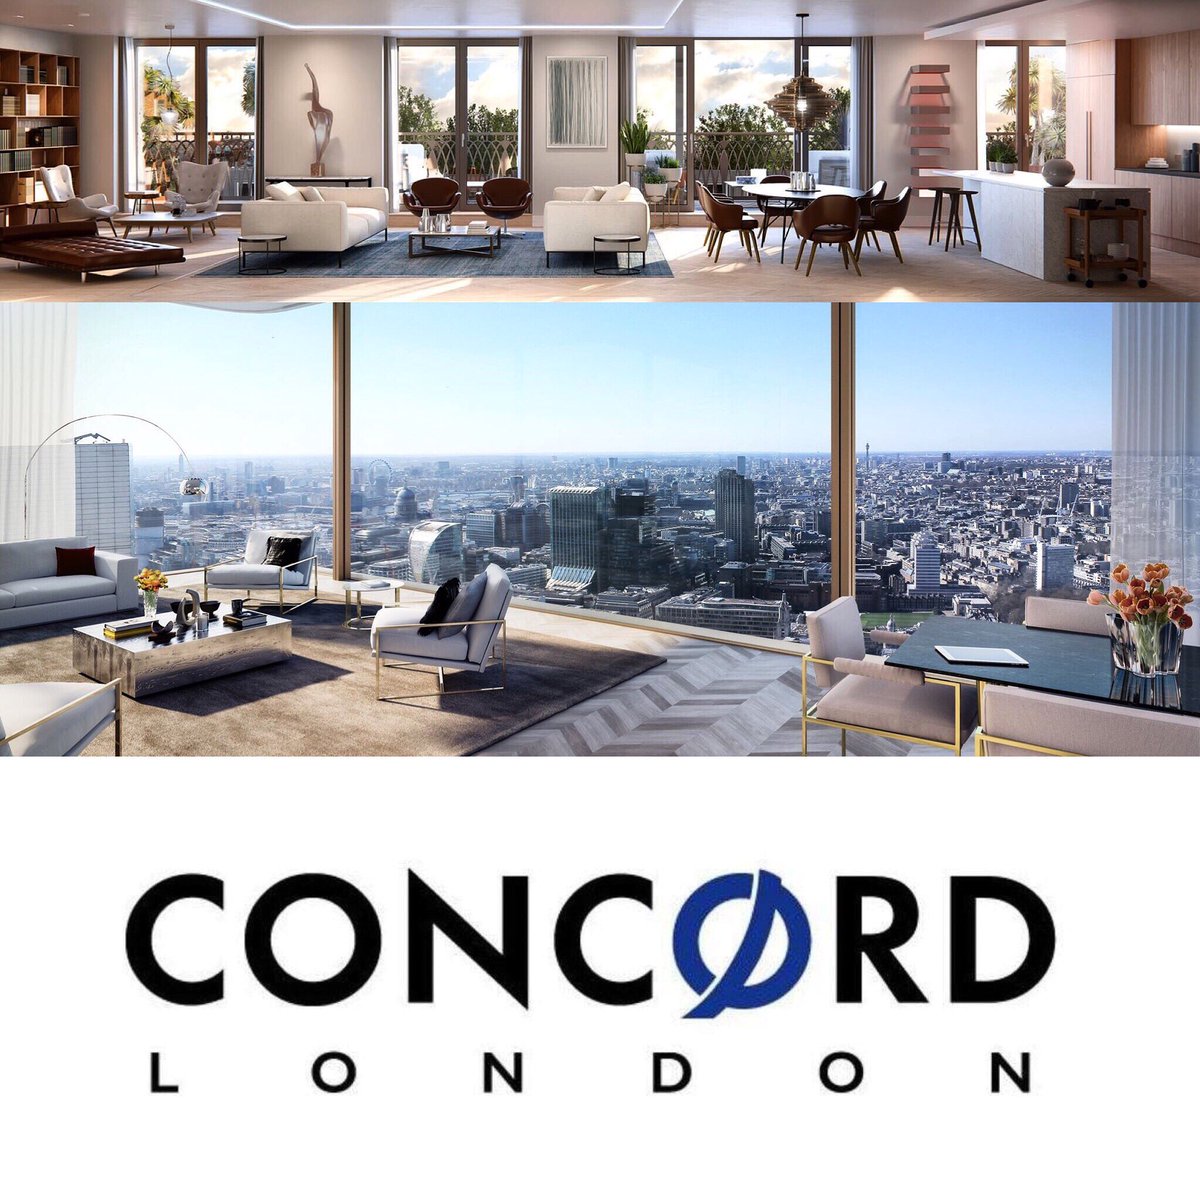 CONCORD LONDON DEVELOPMENTS INTELLIGENTLY DESIGNED FOR MODERN LIVING We stand out amongst the competition by focussing on quality rather than quantity. Design excellence is the cornerstone of every project. For further information visit concord-london.com